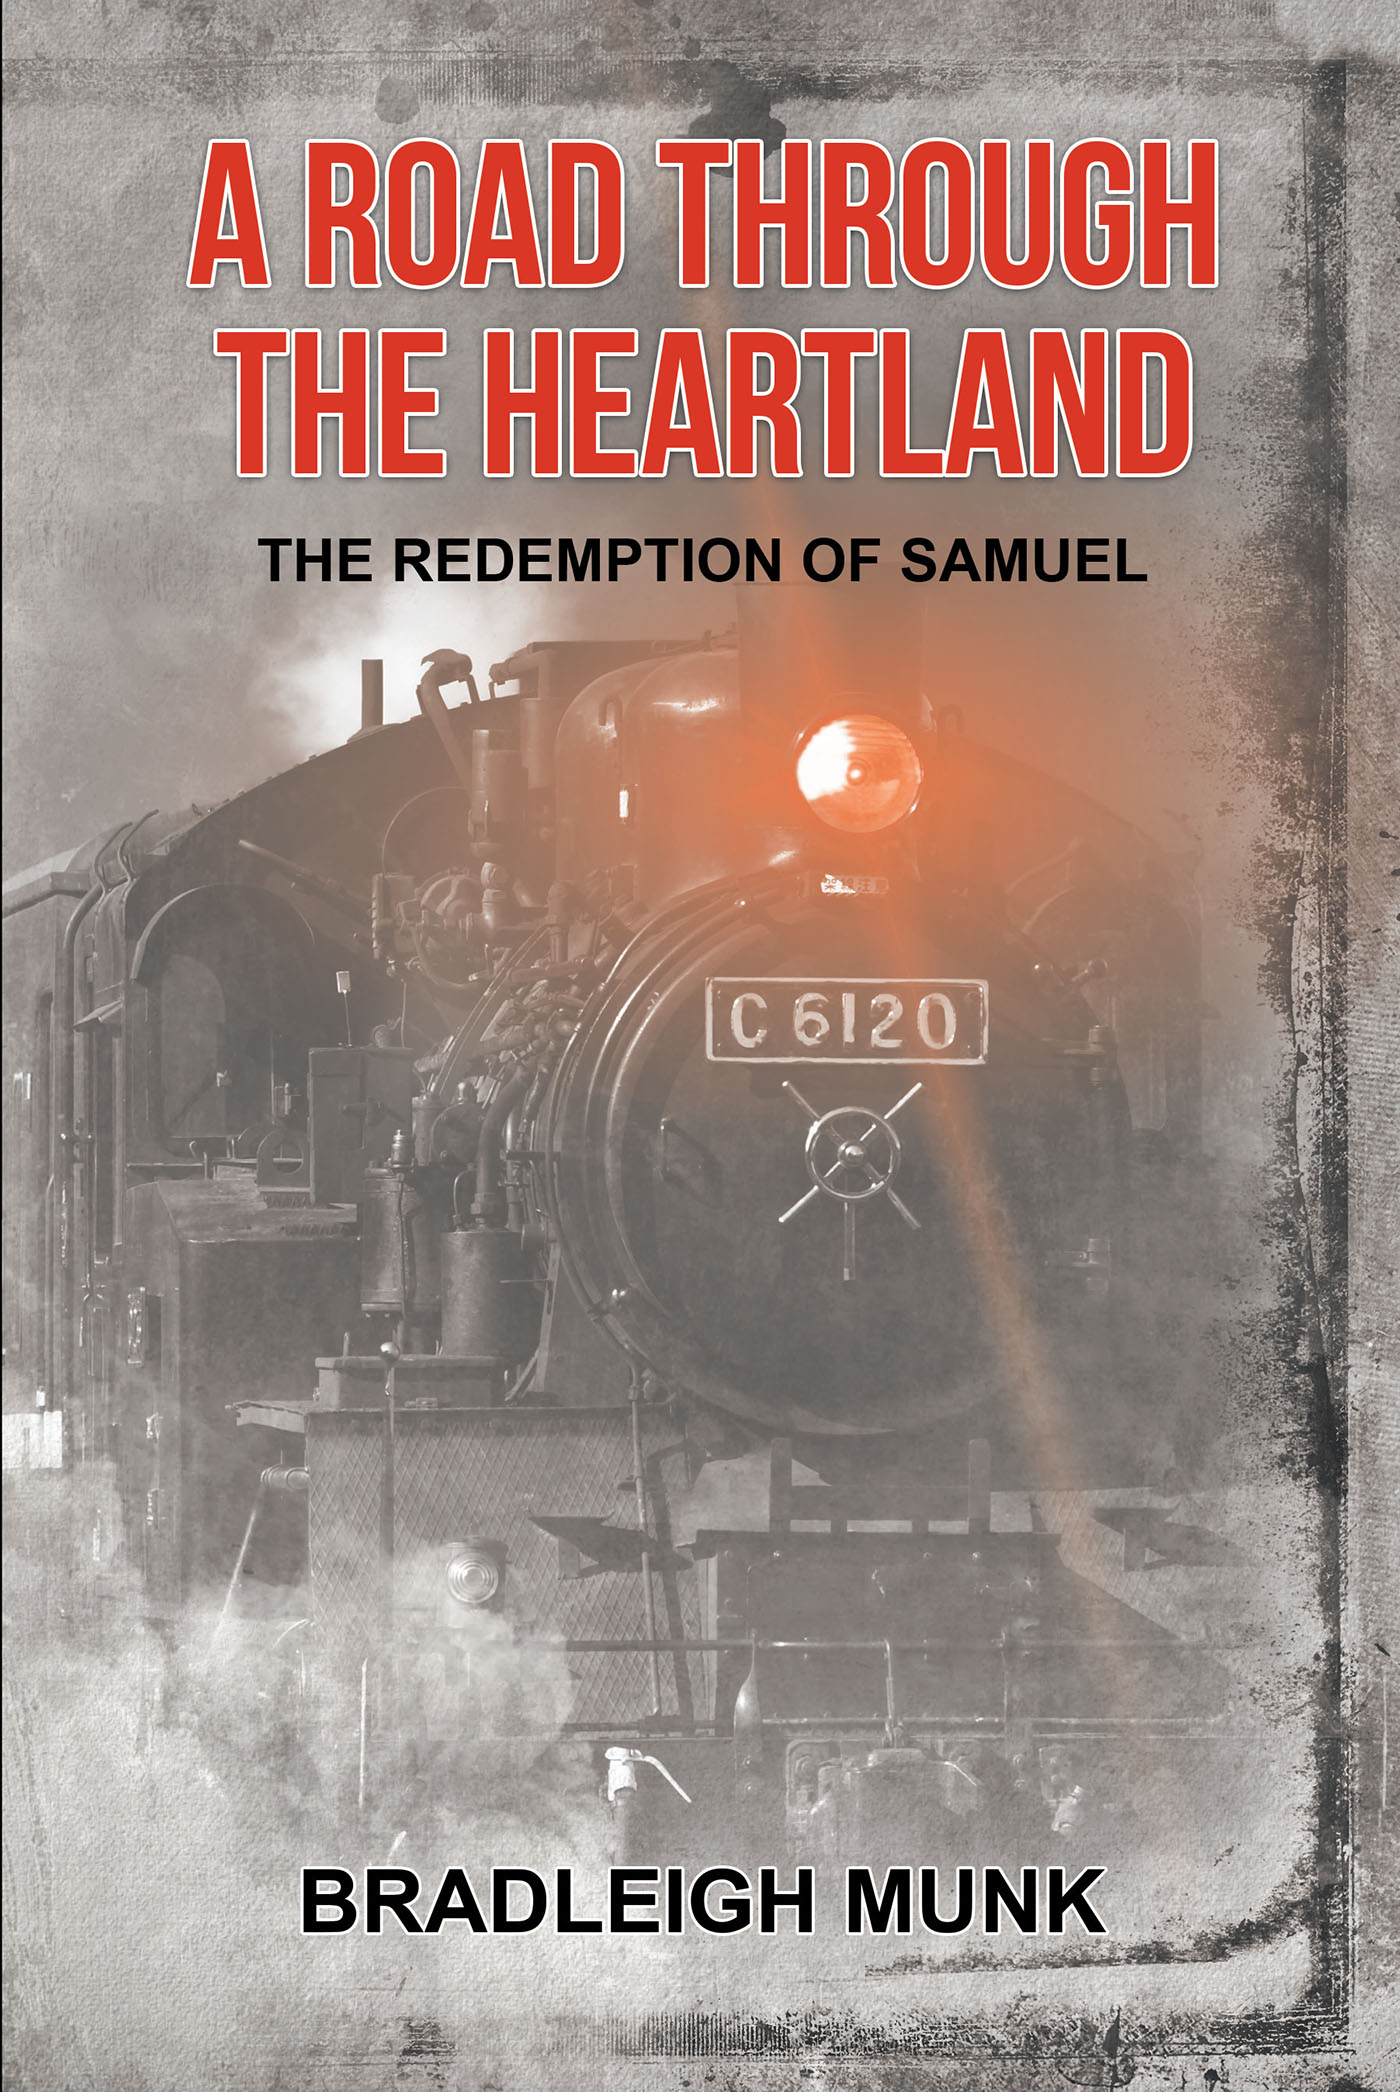 Bradleigh Munk’s New Book, "A Road Through the Heartland," the Third of the Series, Follows a Group of Friends as They Travel Through Time and Rethink Changes to the Past